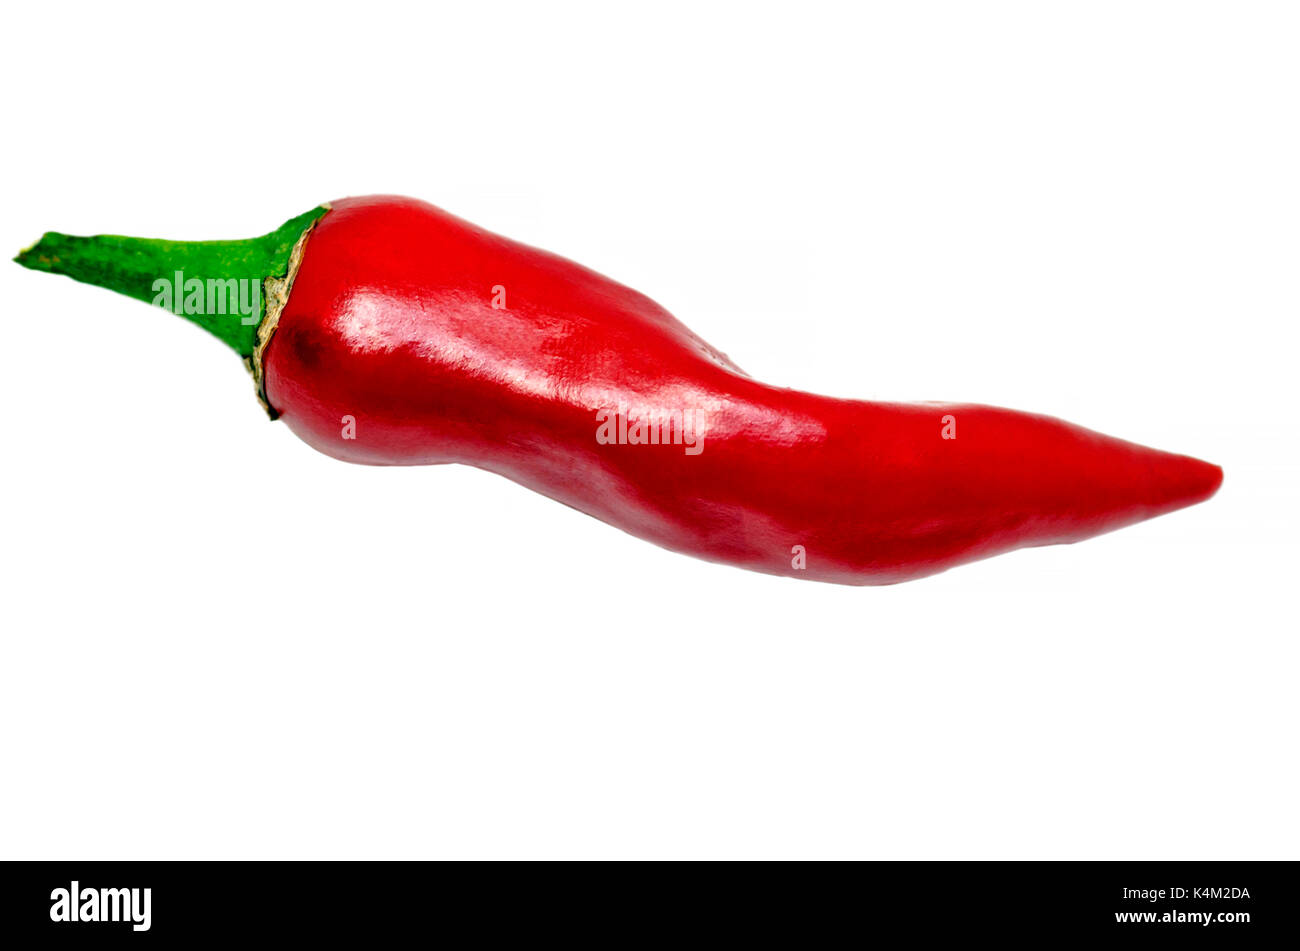 Isolated red chili pepper Stock Photo